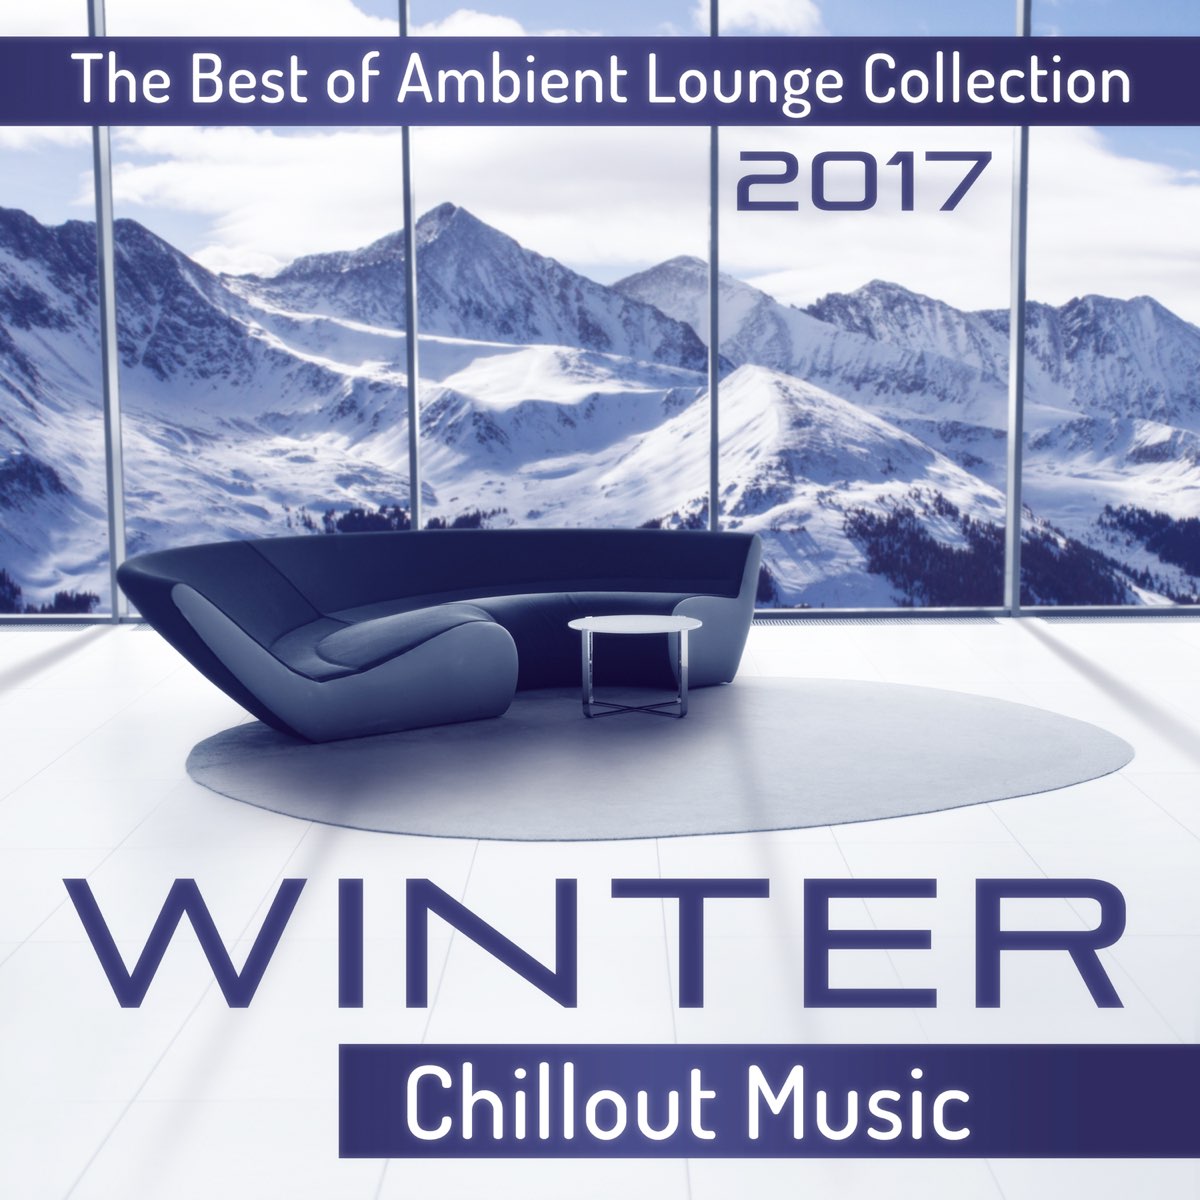 Best chillout music. Винтер чил. Ambient best. Ambient goods. Winter Chill песня.